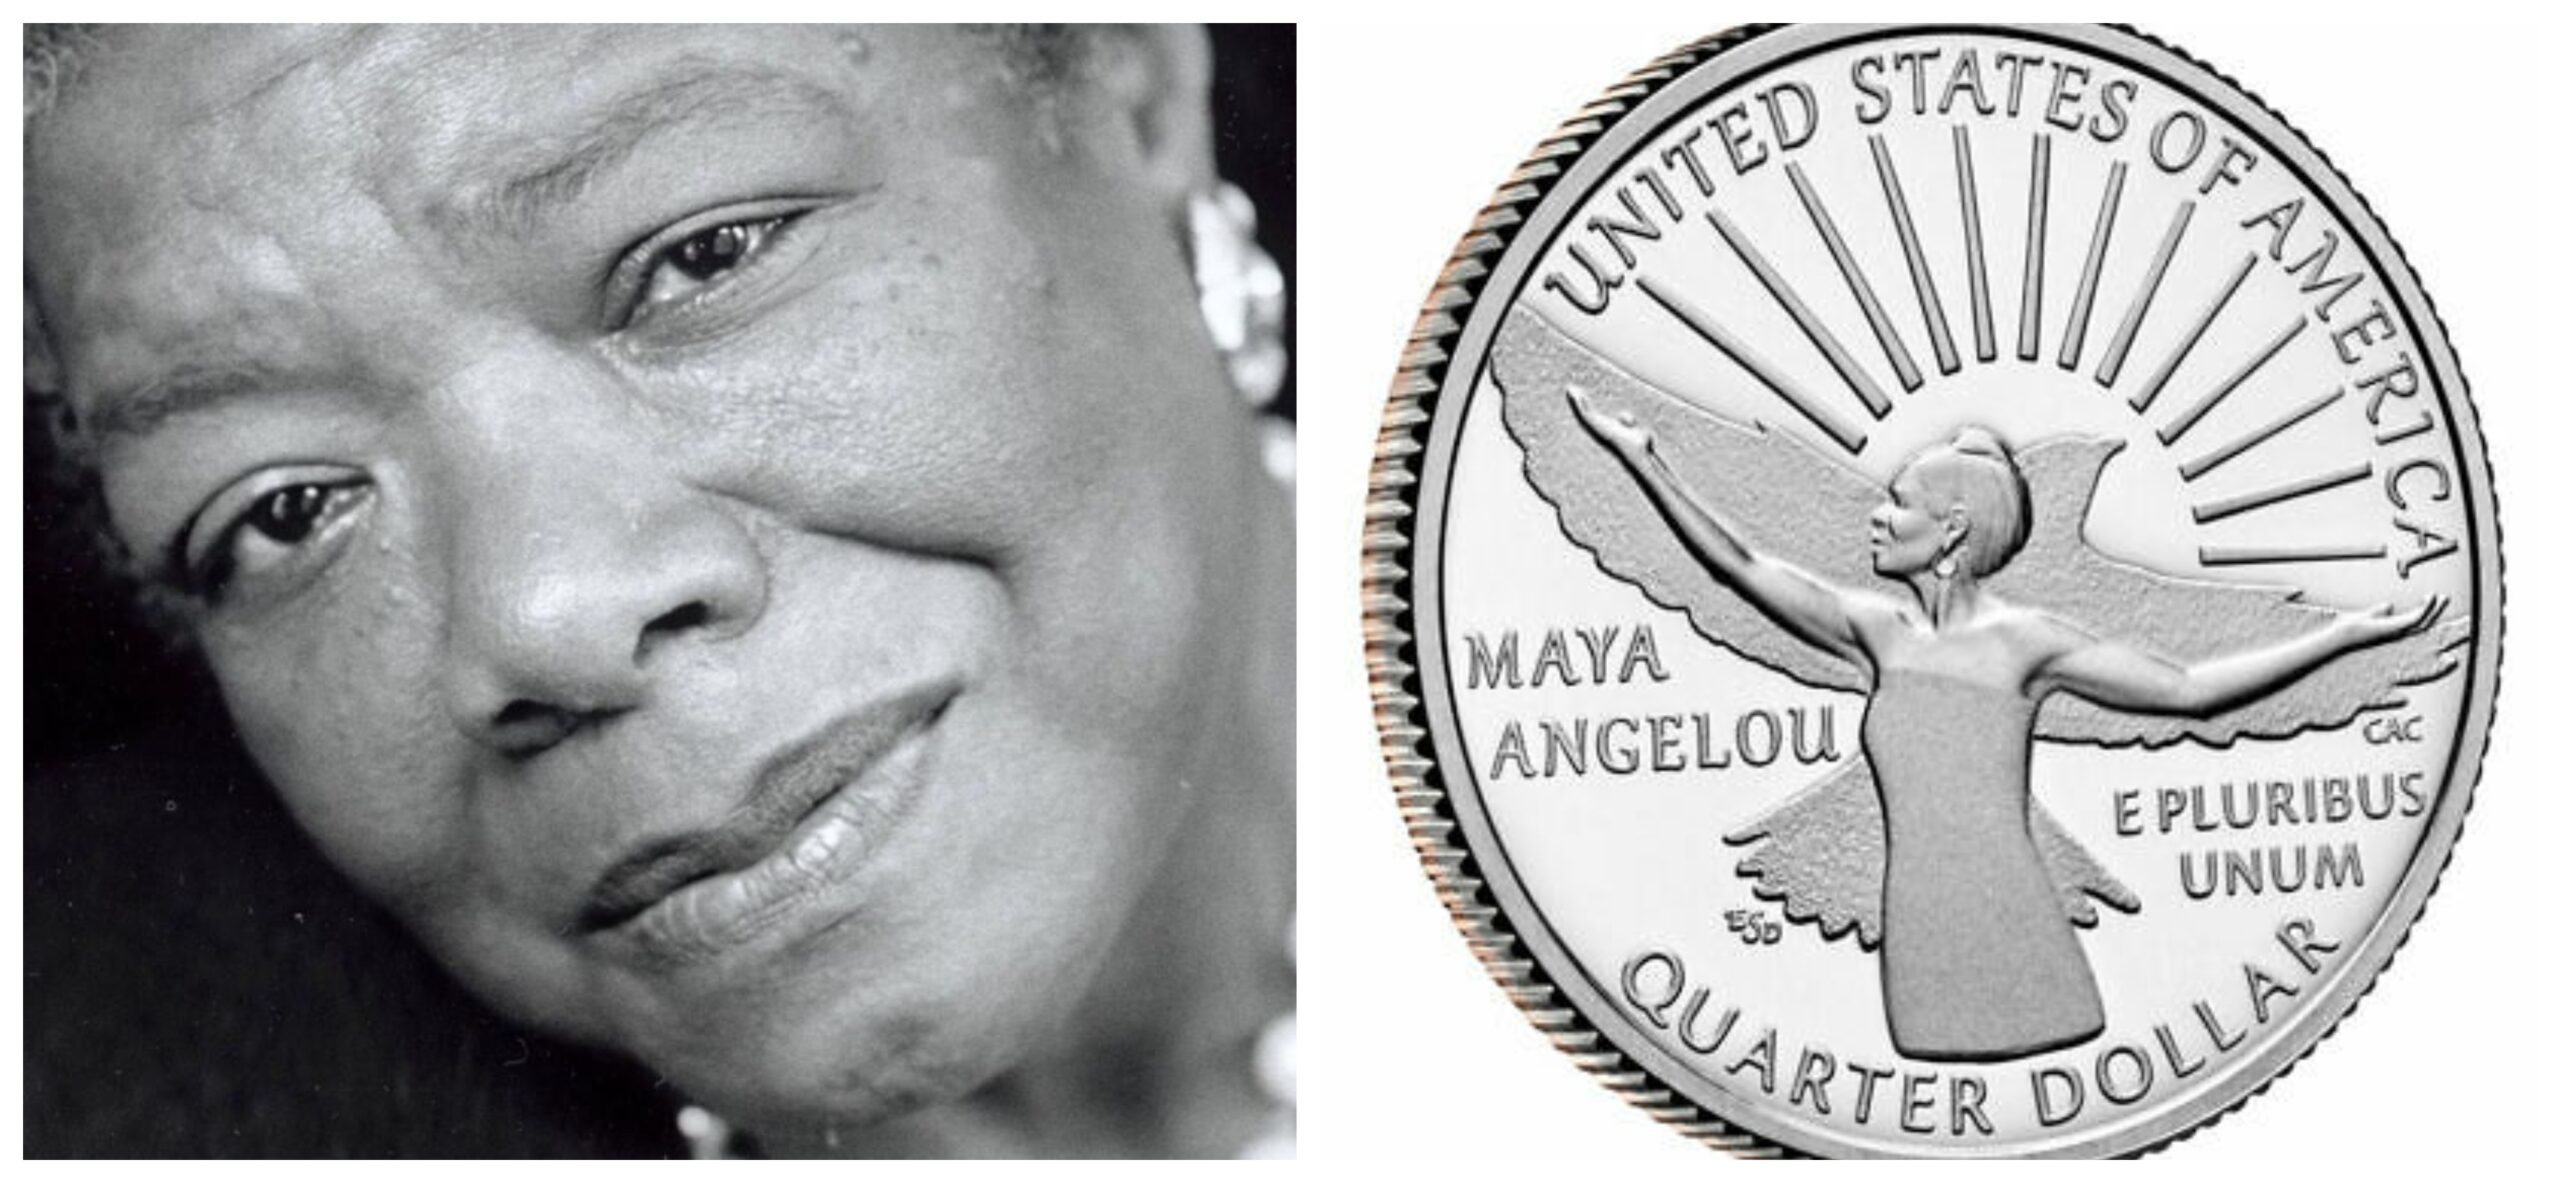 Late Poet and Civil Rights Activist Maya Angelou Becomes First Black Woman on U.S. Quarter!